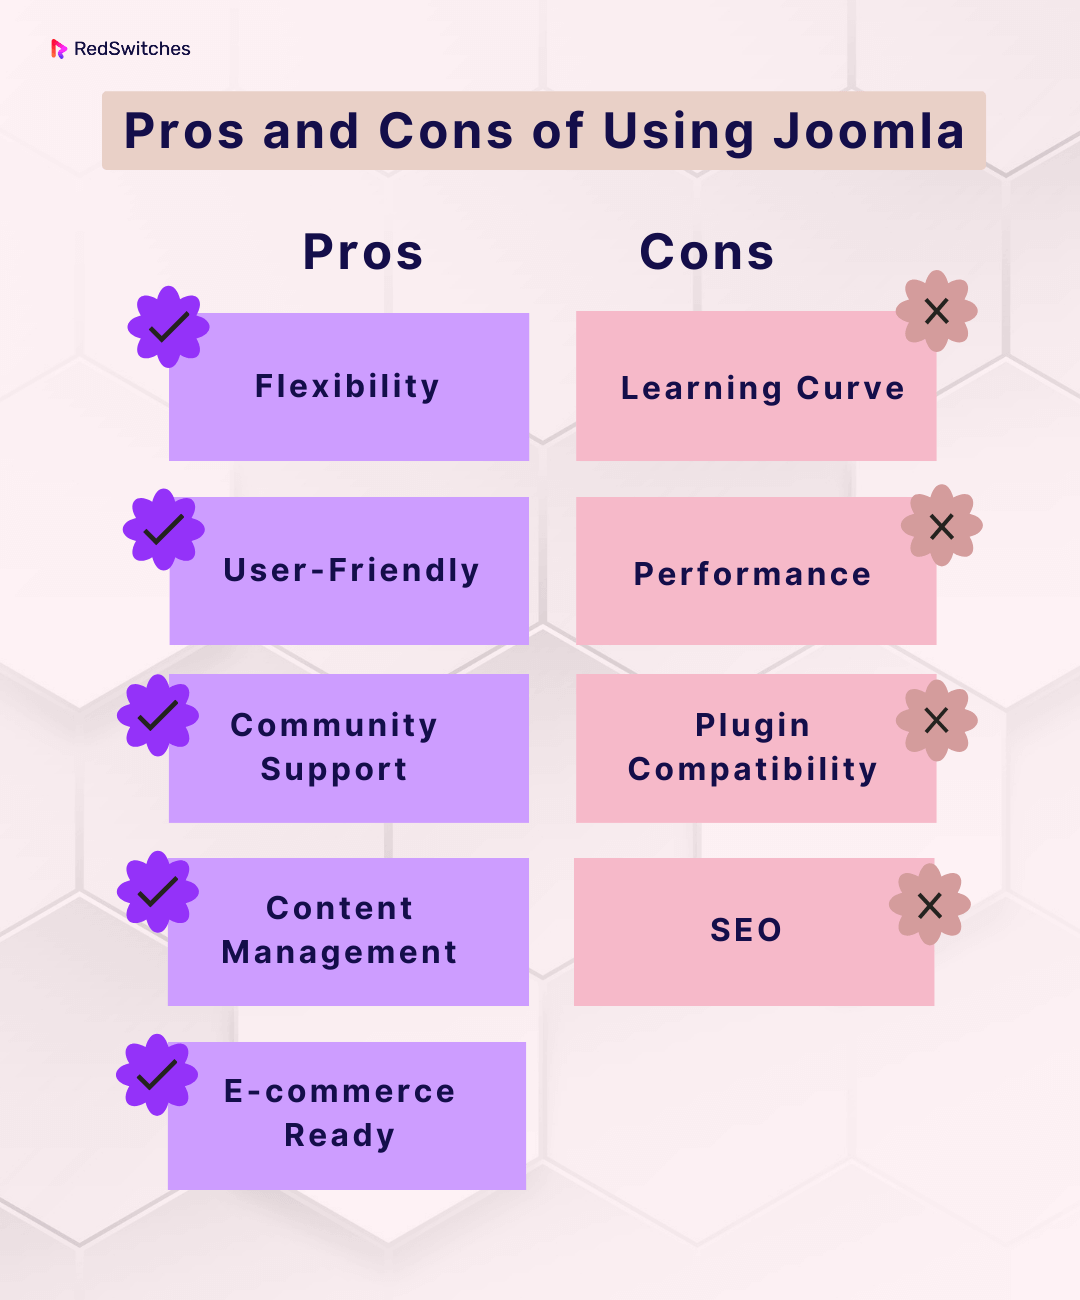 Pros and Cons of Using Joomla